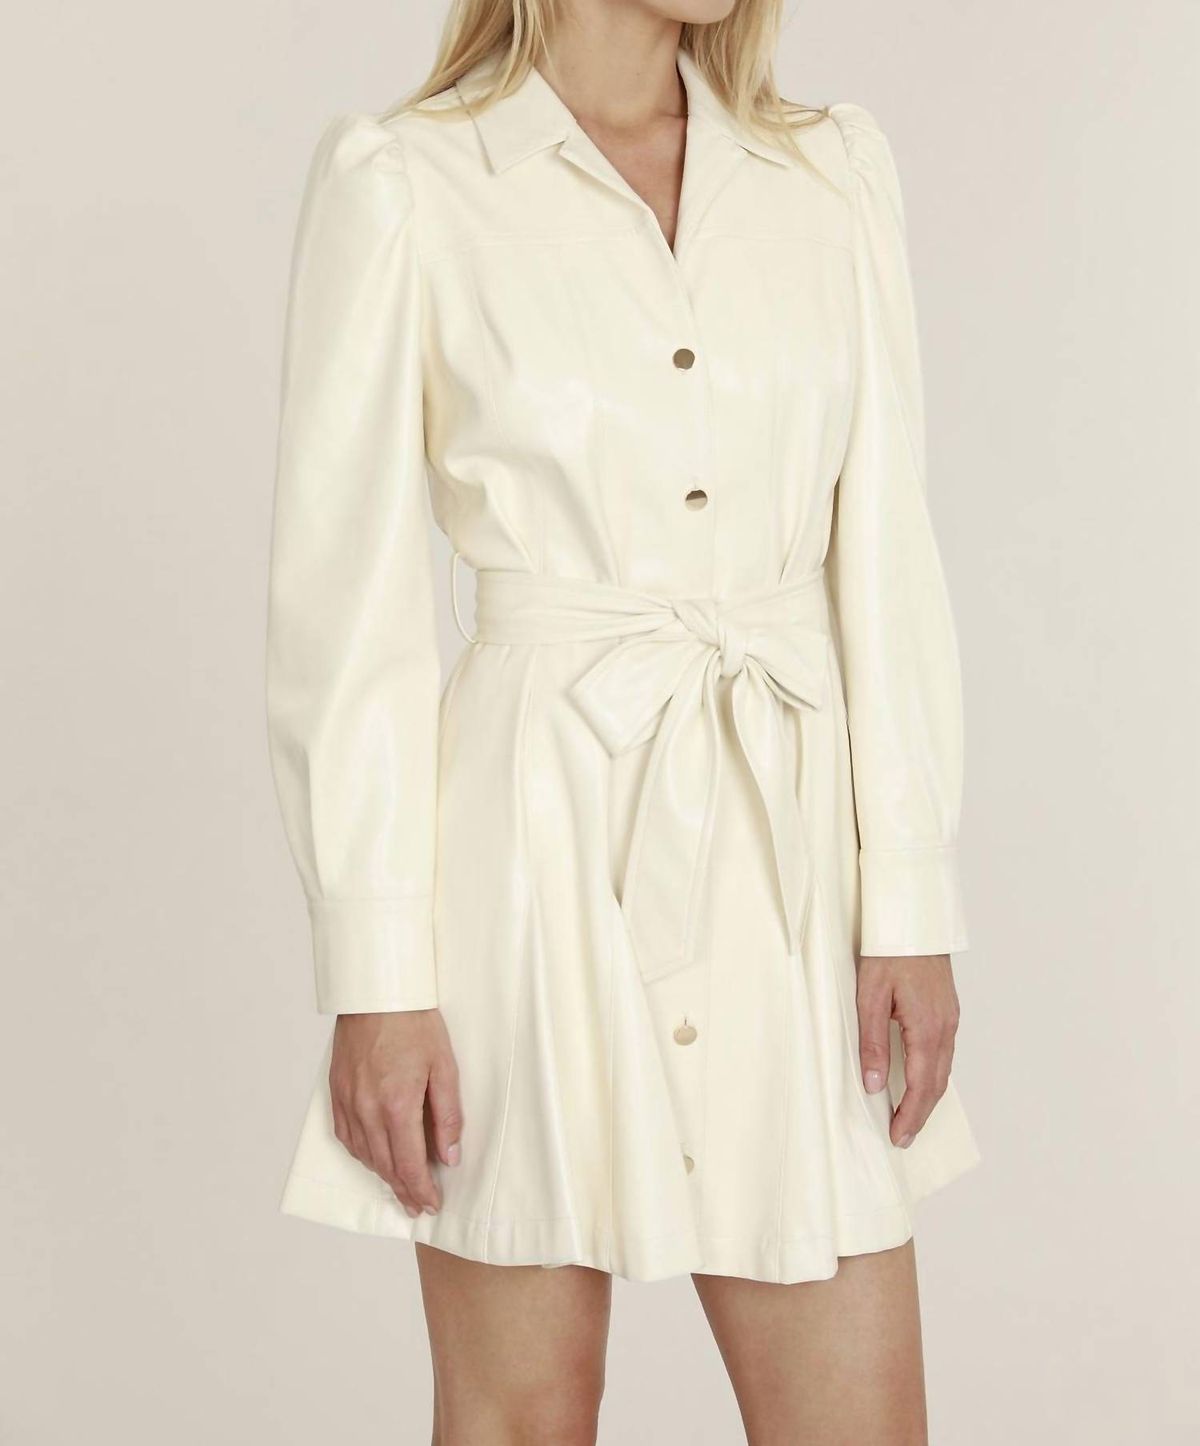 Style 1-2622616240-2696 DOLCE CABO Size L Long Sleeve White Cocktail Dress on Queenly